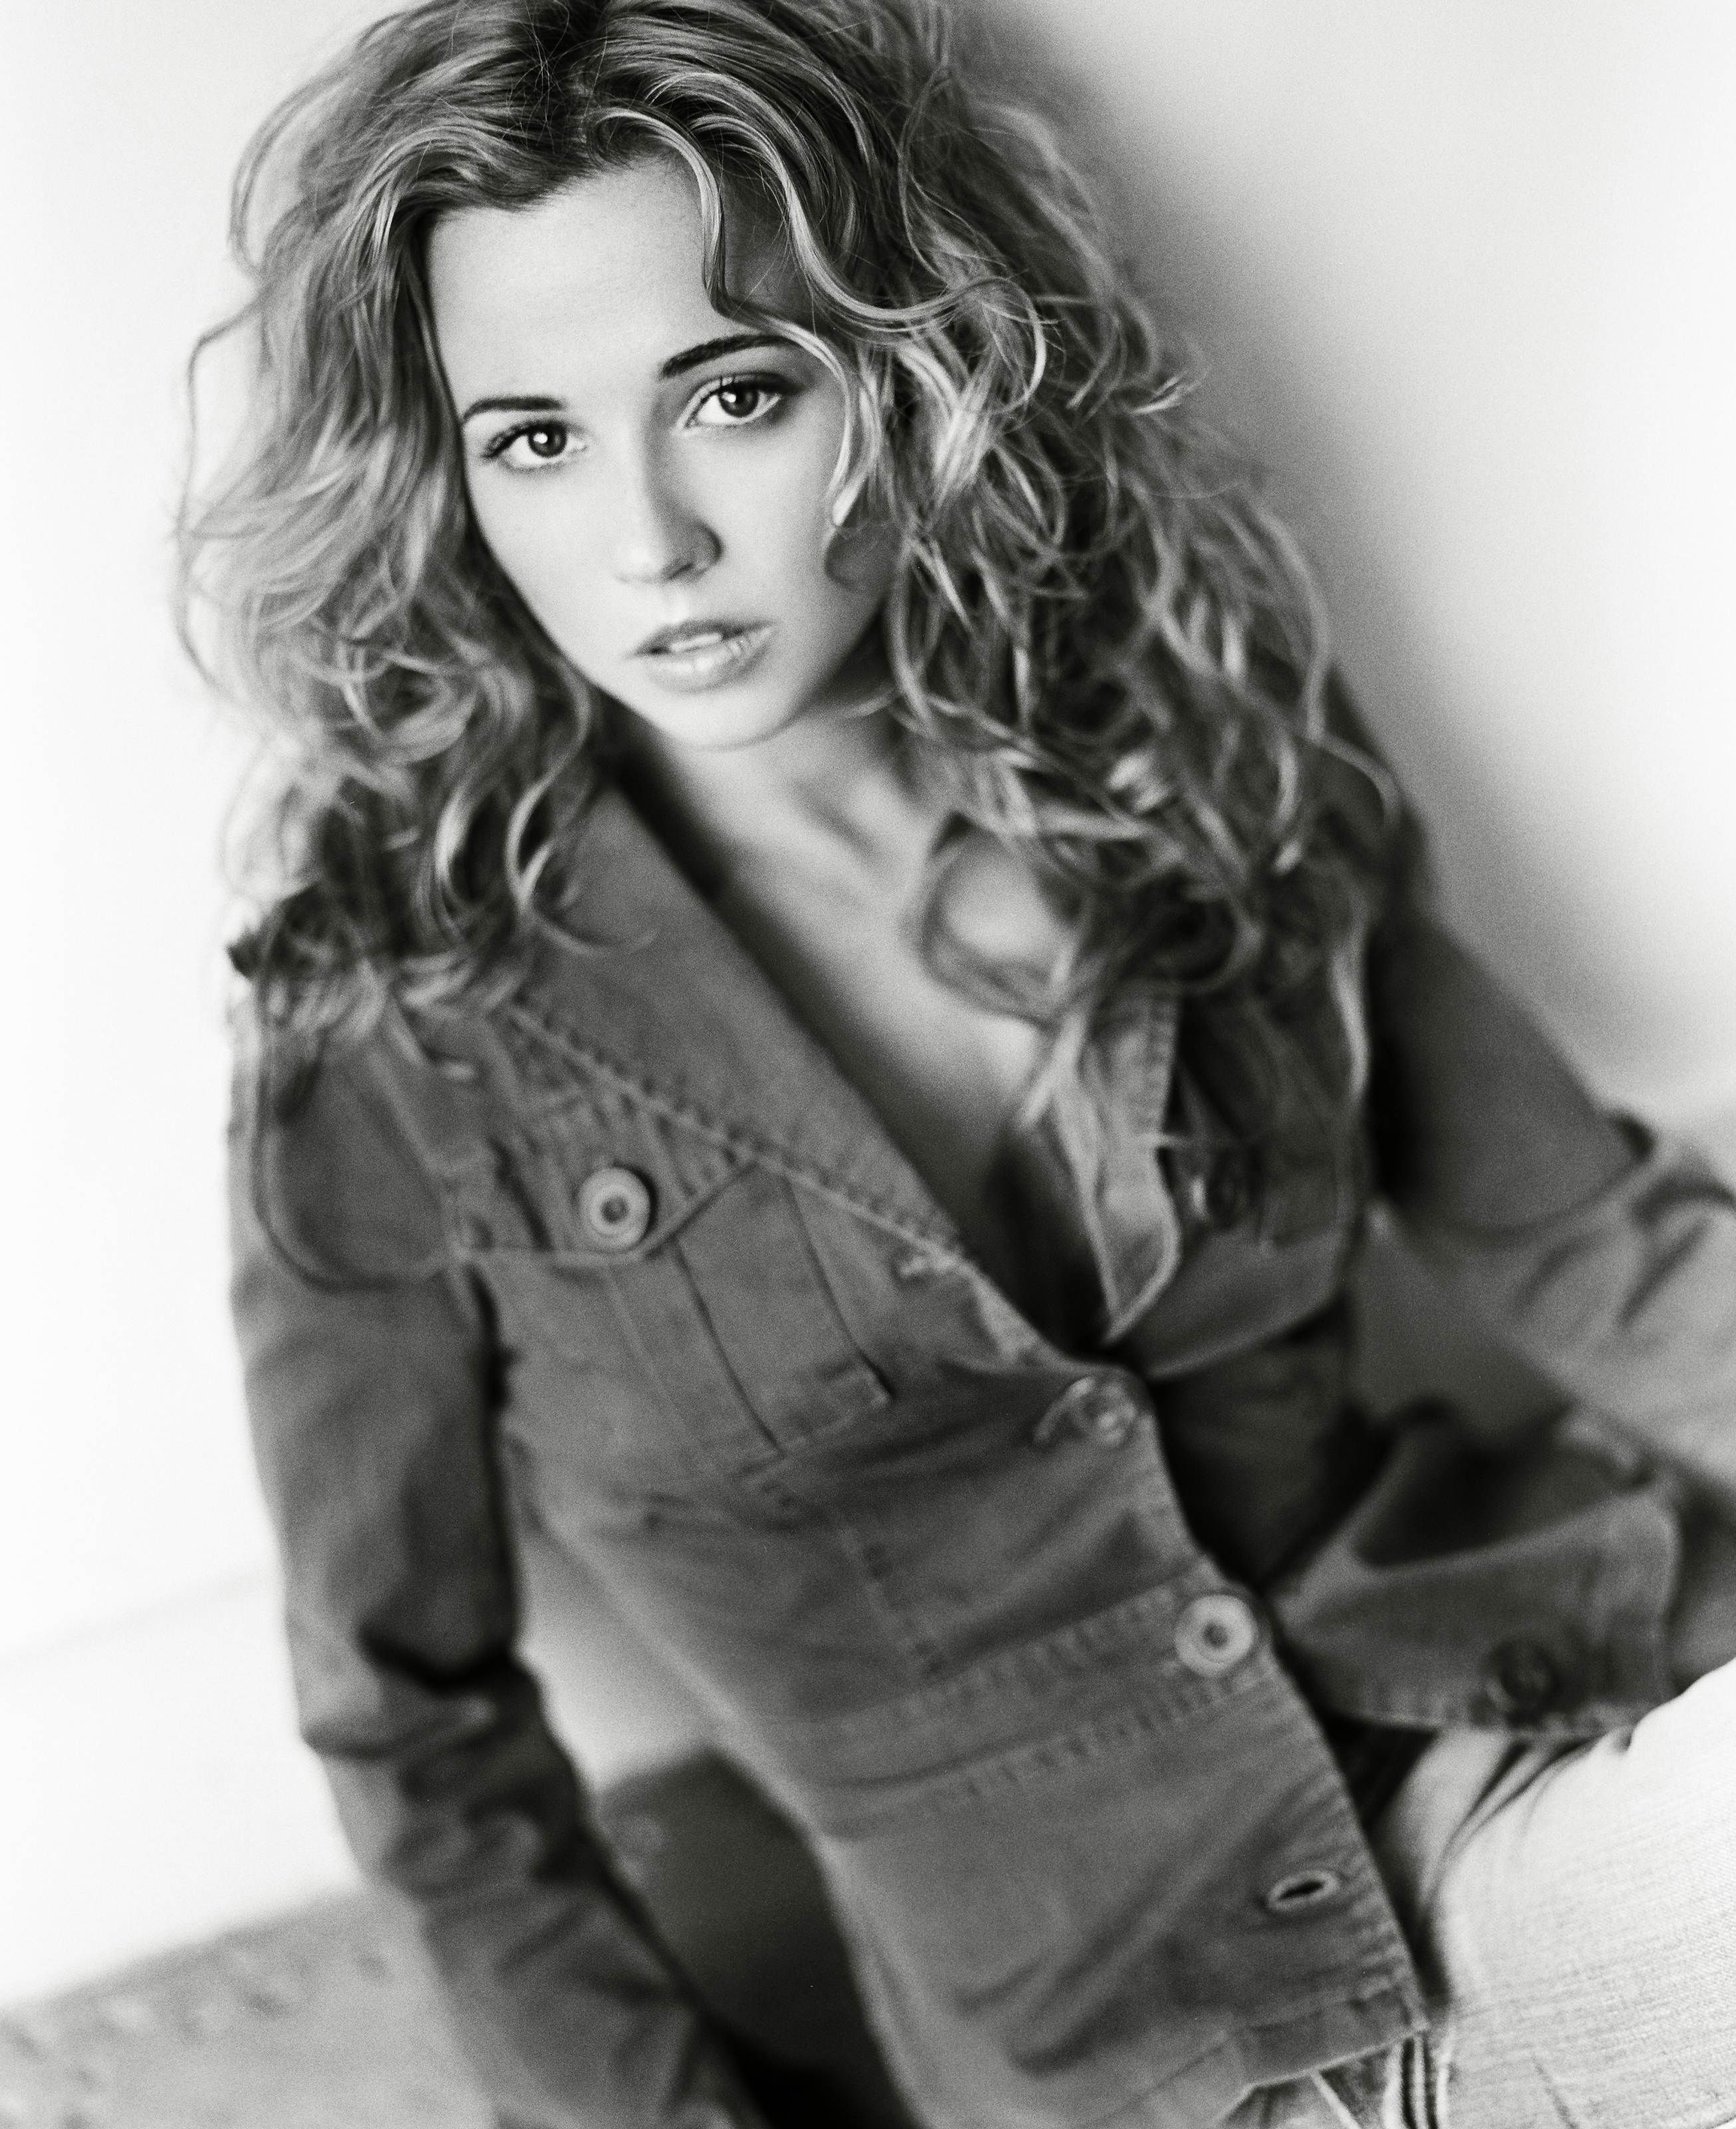 To download the Linda Cardellini Wallpaper Hot just Right Click on the